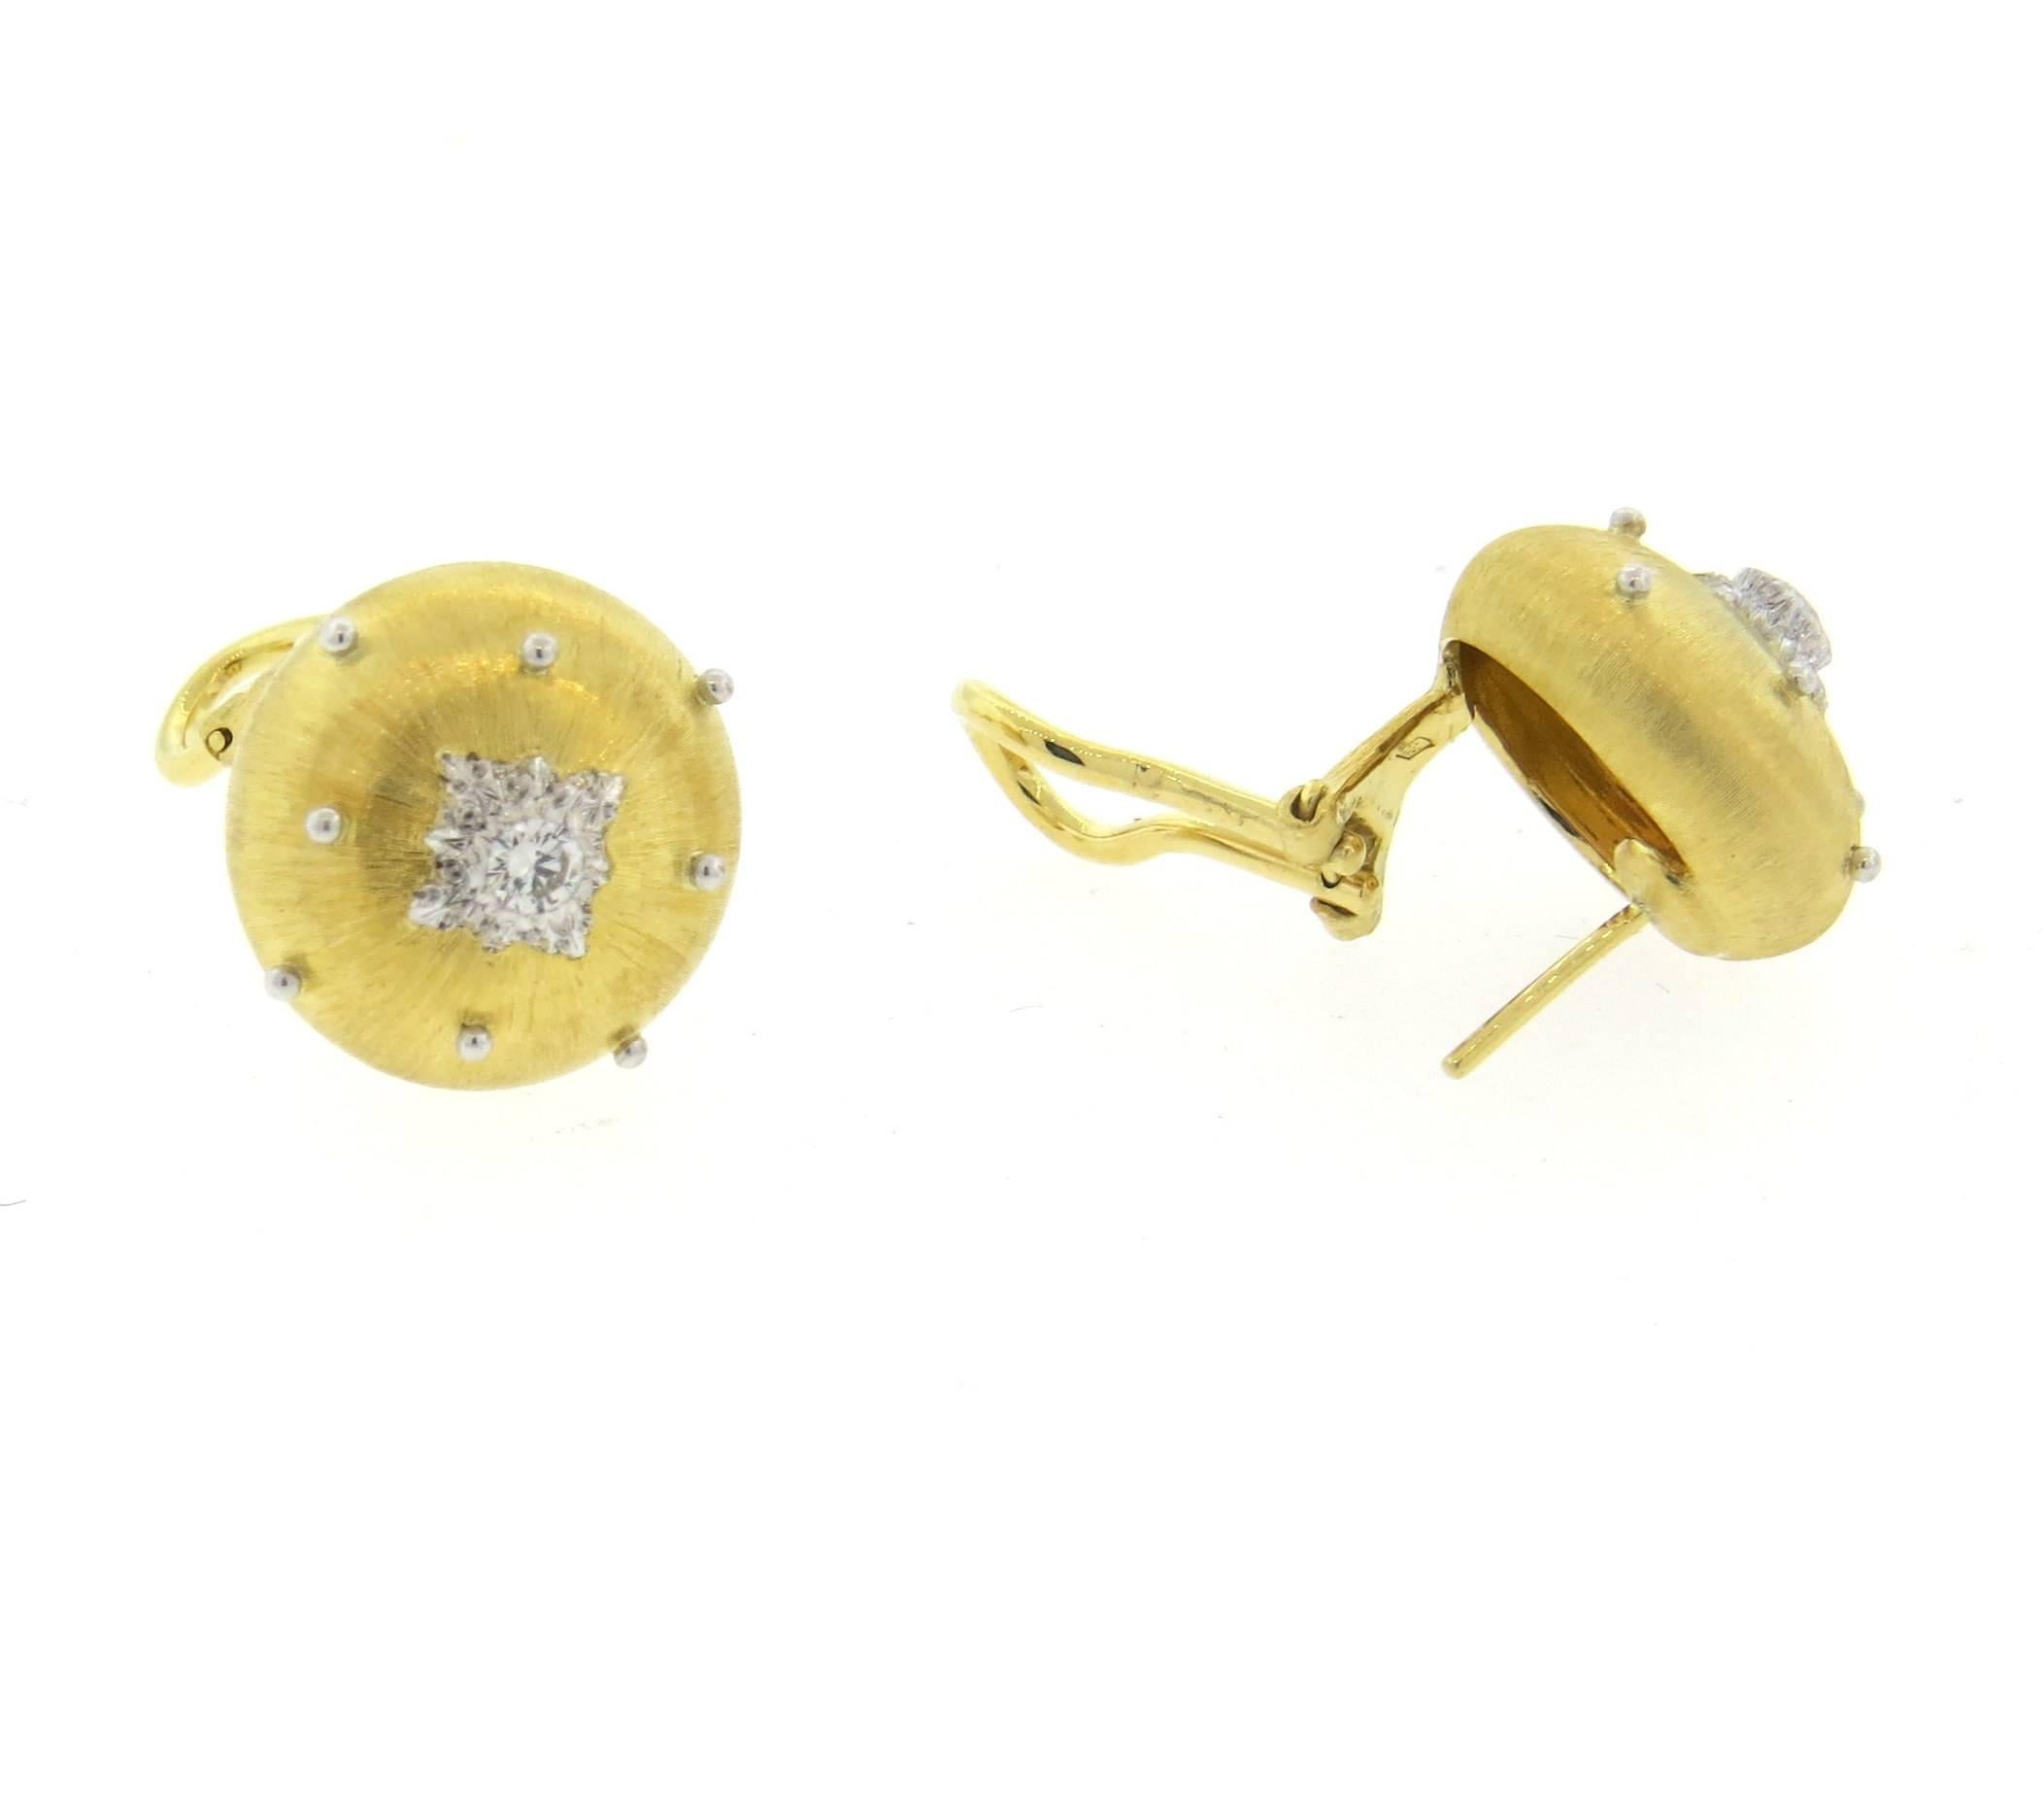 A pair of 18k yellow gold button earrings, crafted by Buccellati, set with 0.25ctw GH/VS diamonds.  Earrings are 16mm in diameter. Marked: Buccellati Italy 18k M6373. Weight - 12.5 grams 